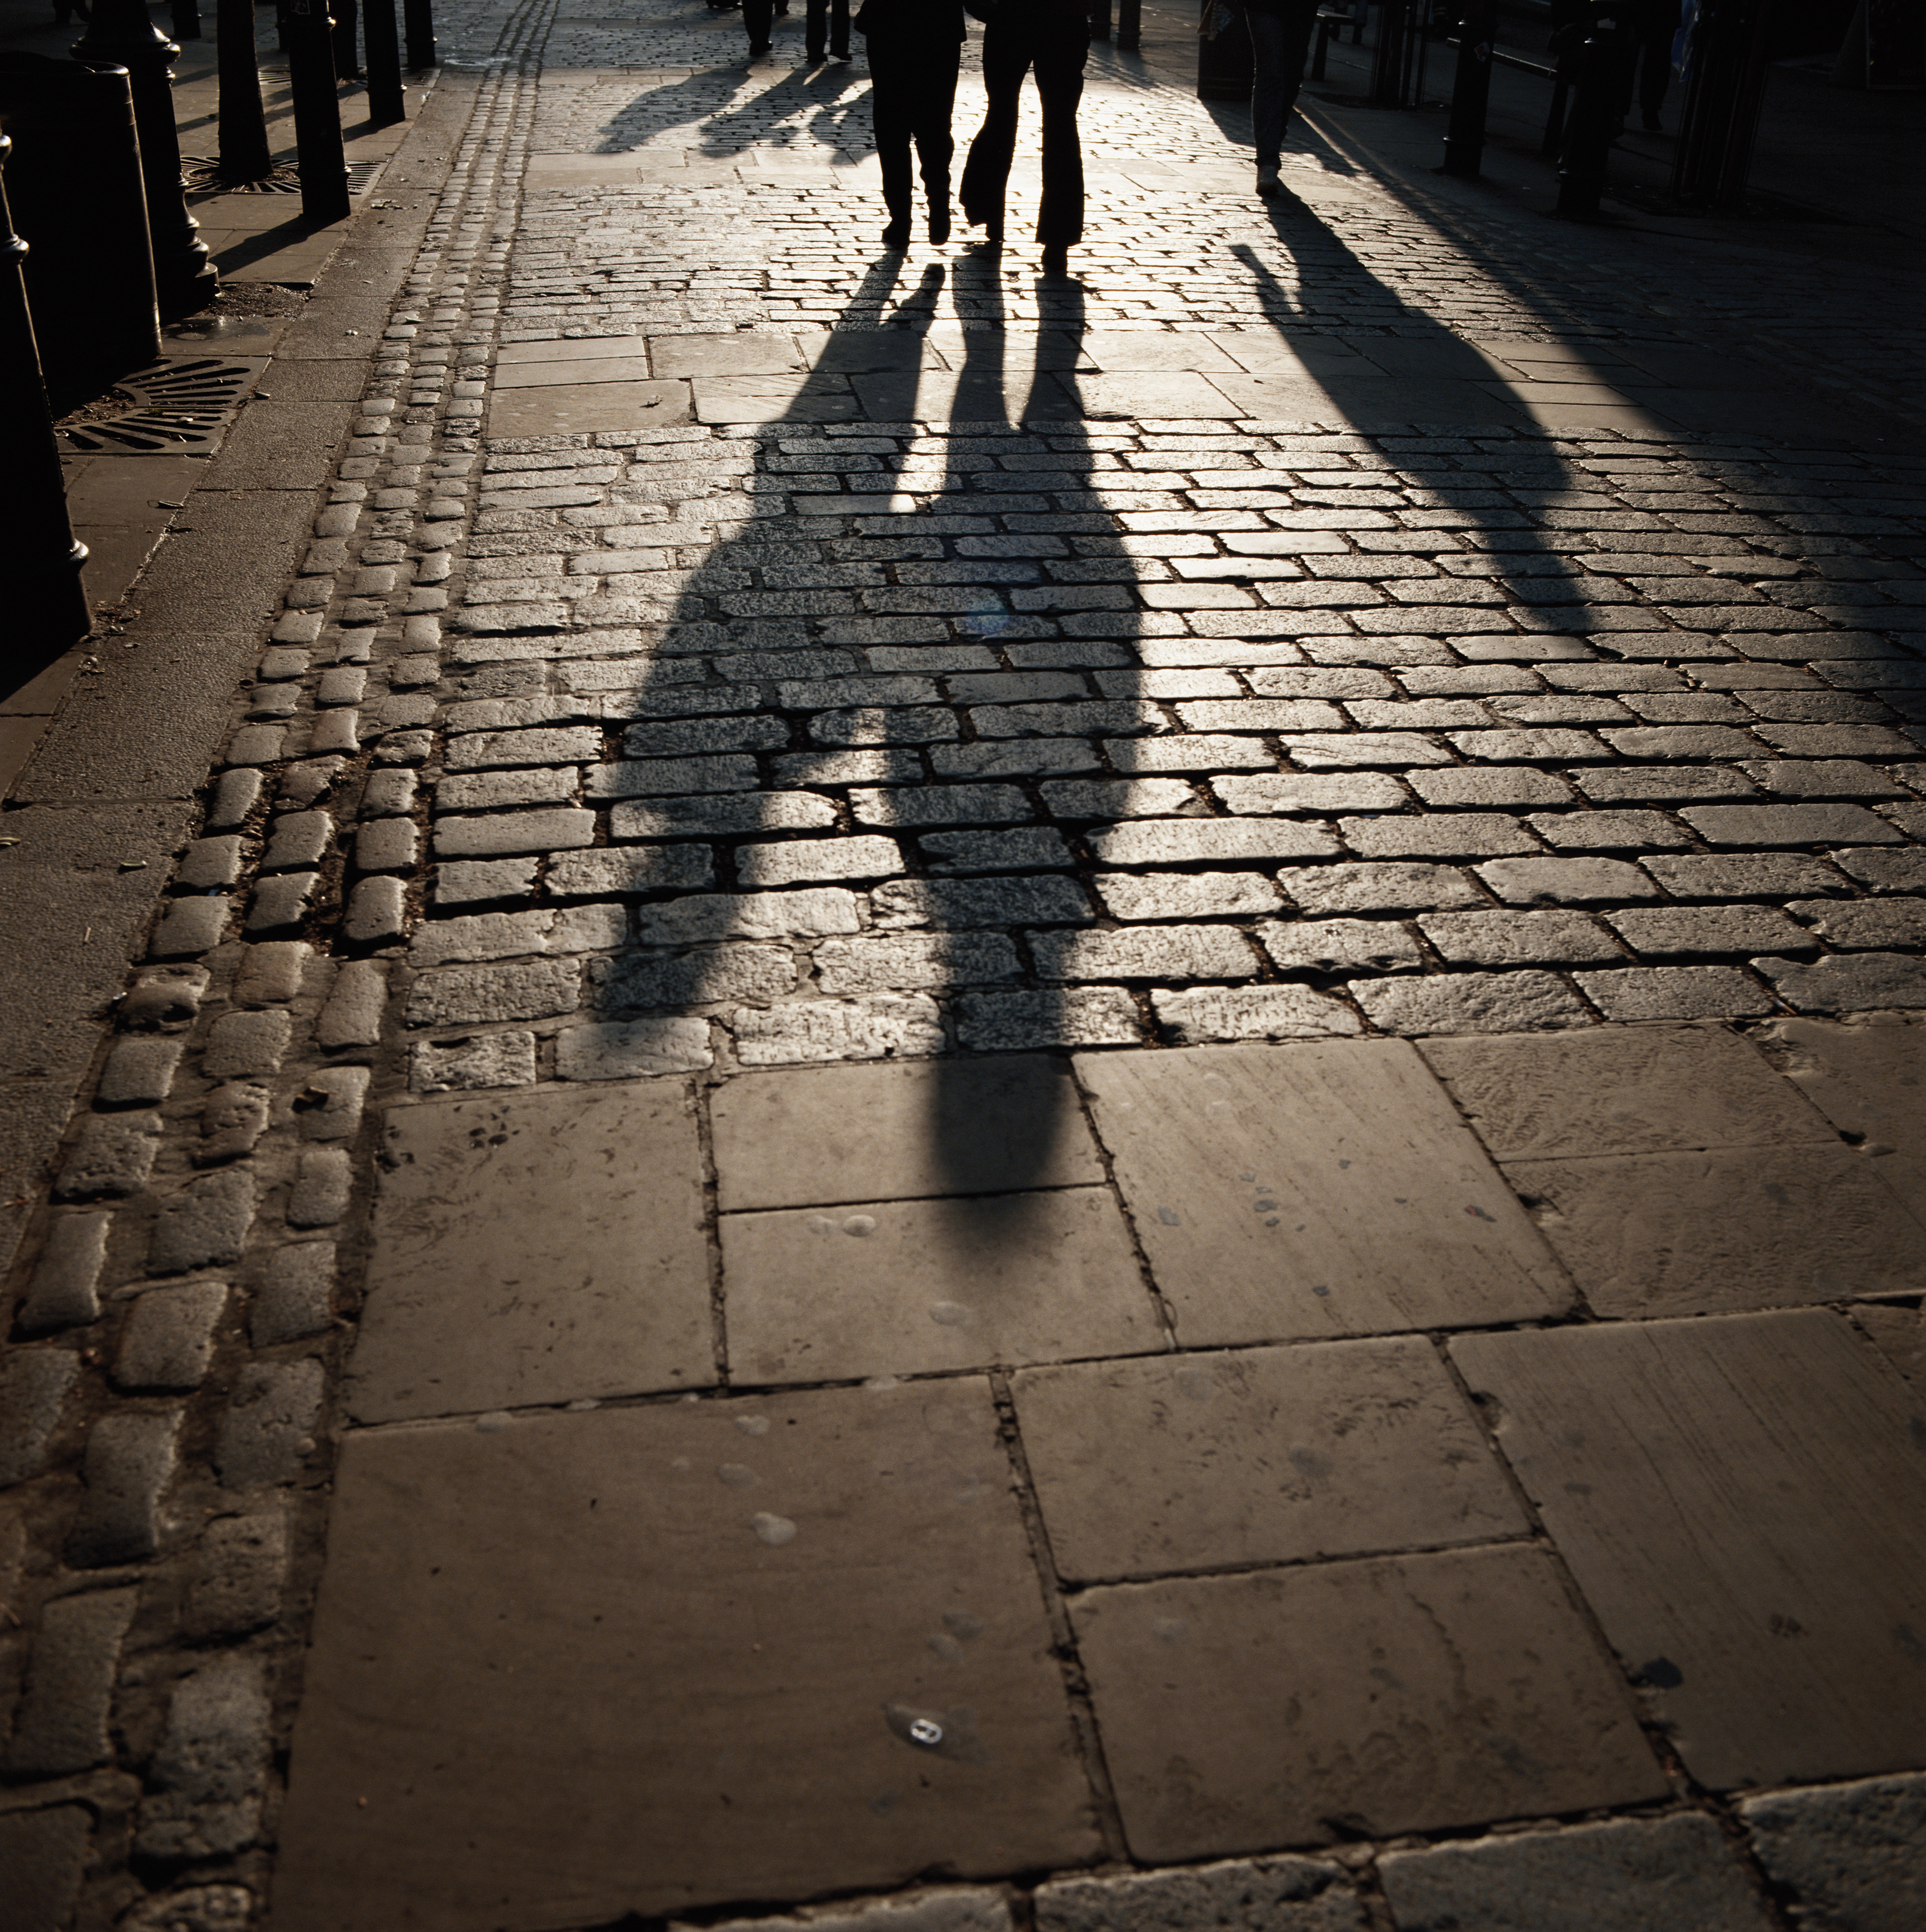 Shadow of people walking on footpath | Source: Getty Images